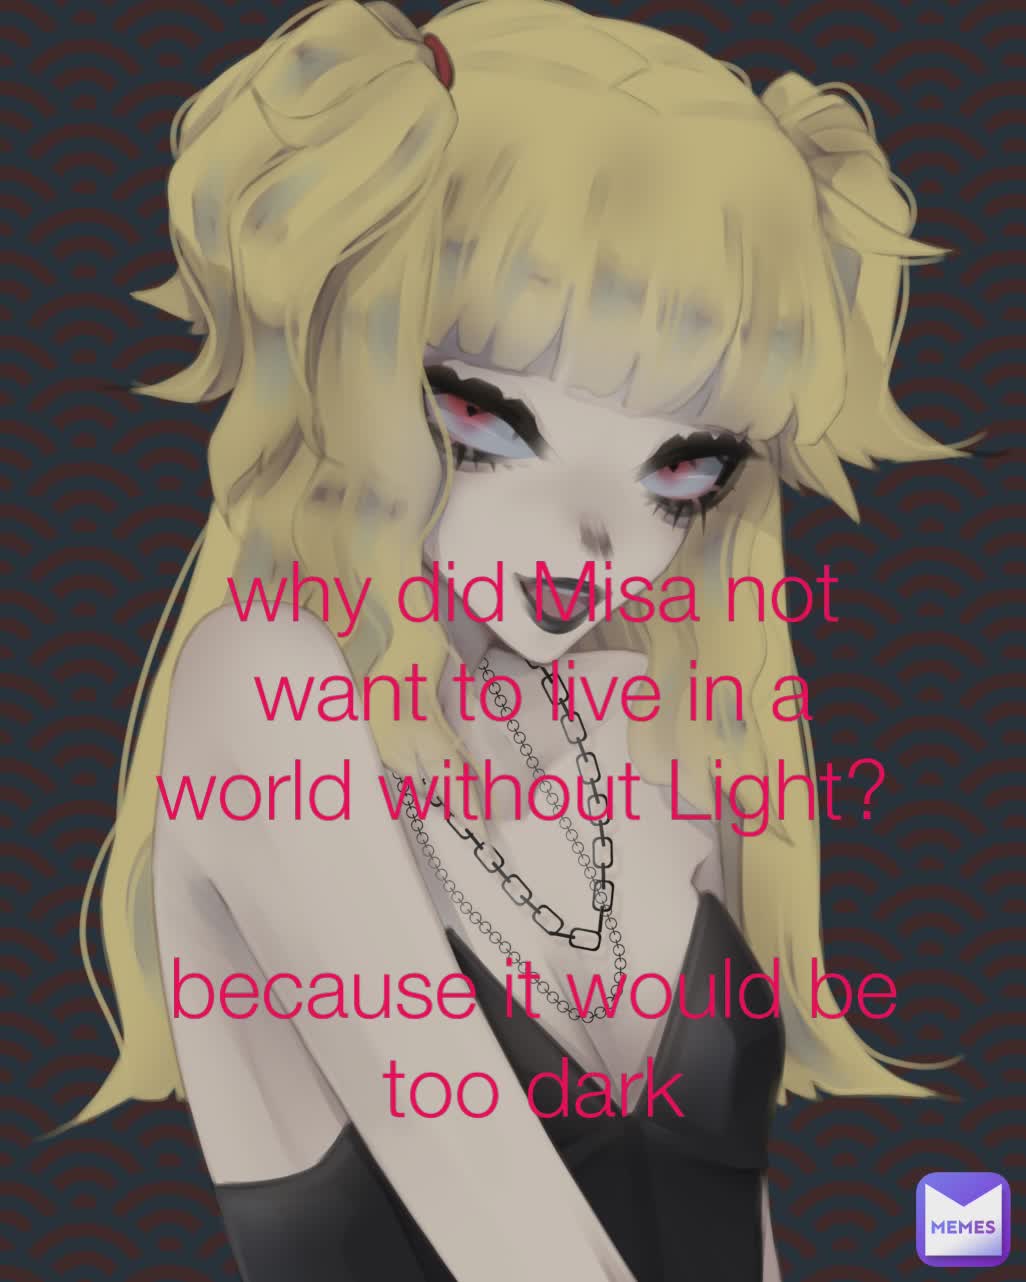 why did misa not want to live in a world without Light?

because it would be too dark why did Misa not want to live in a world without Light? 

because it would be too dark